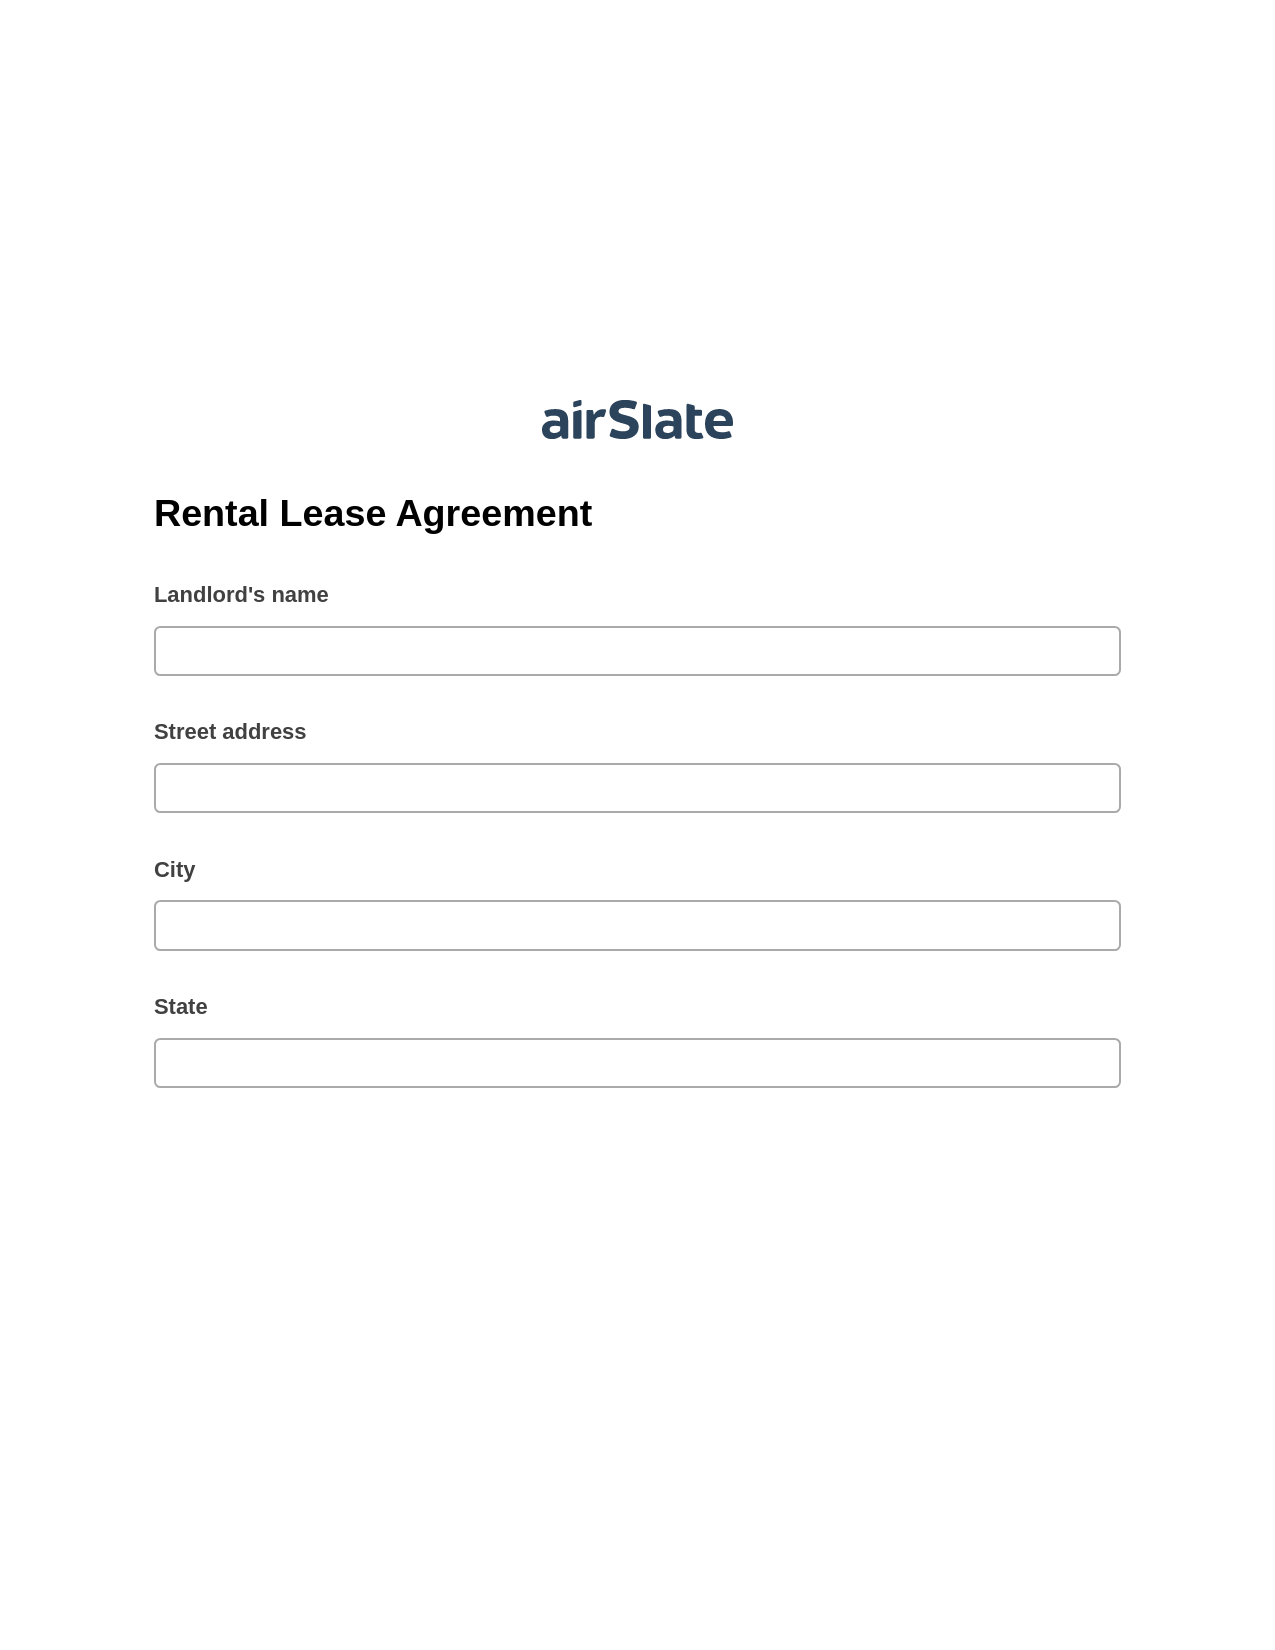 Multirole Rental Lease Agreement Pre-fill from CSV File Dropdown Options Bot, Audit Trail Bot, Box Bot